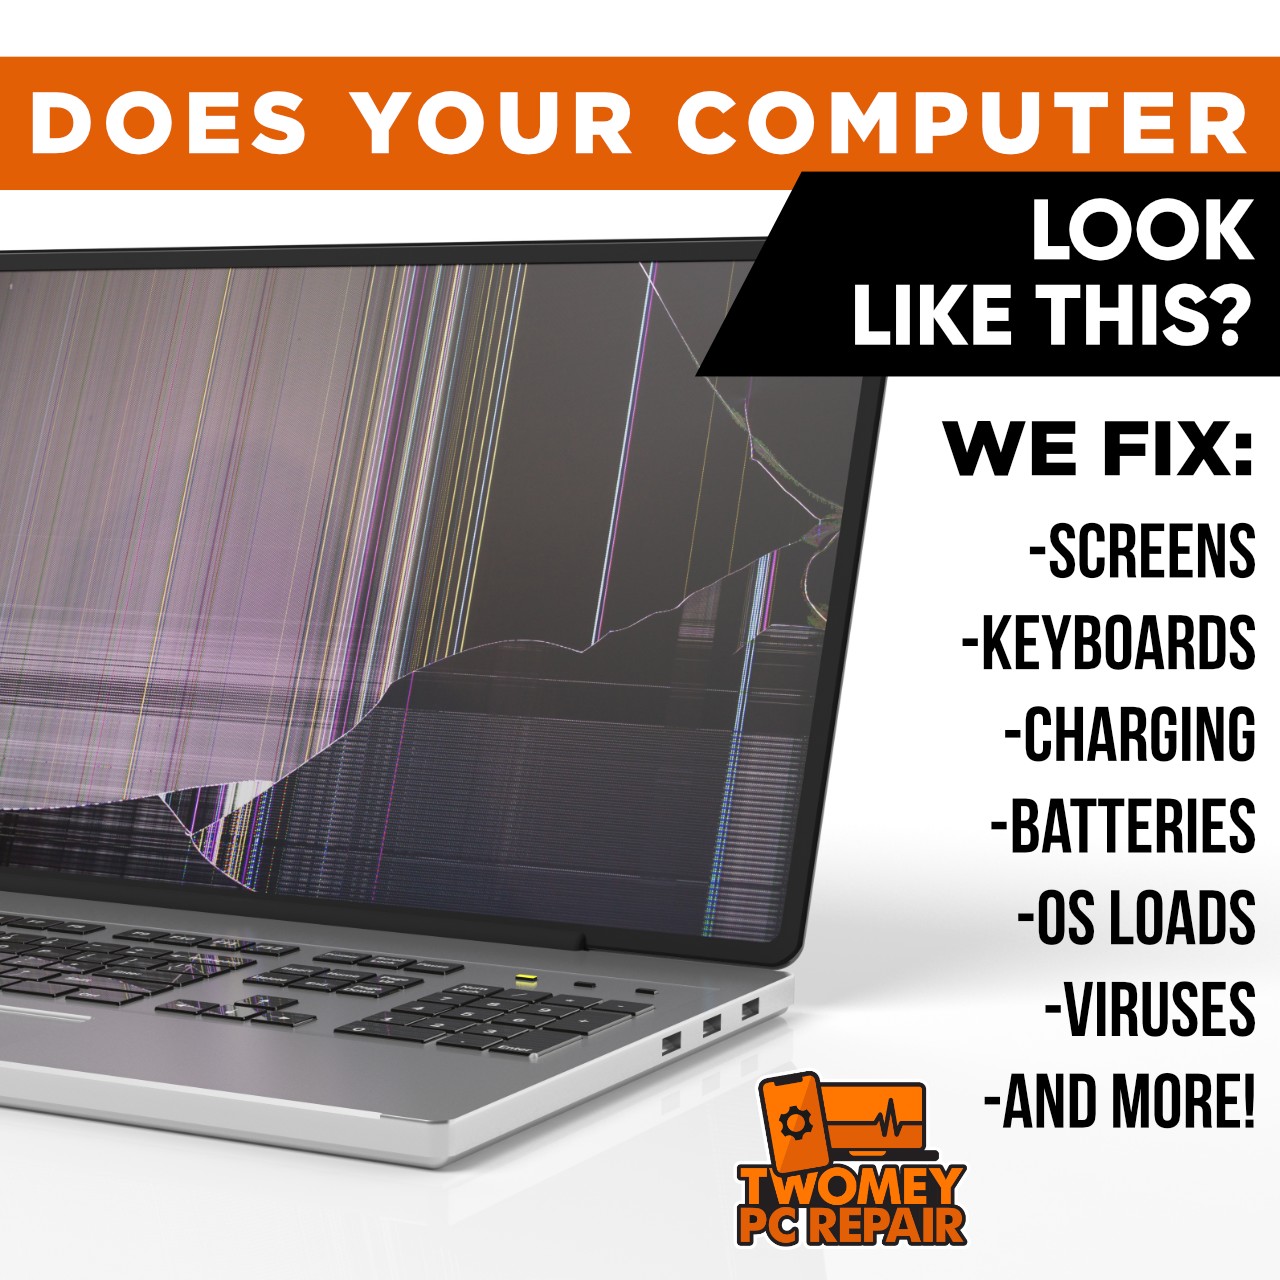 A laptop repair service for those whose computer looks like this.